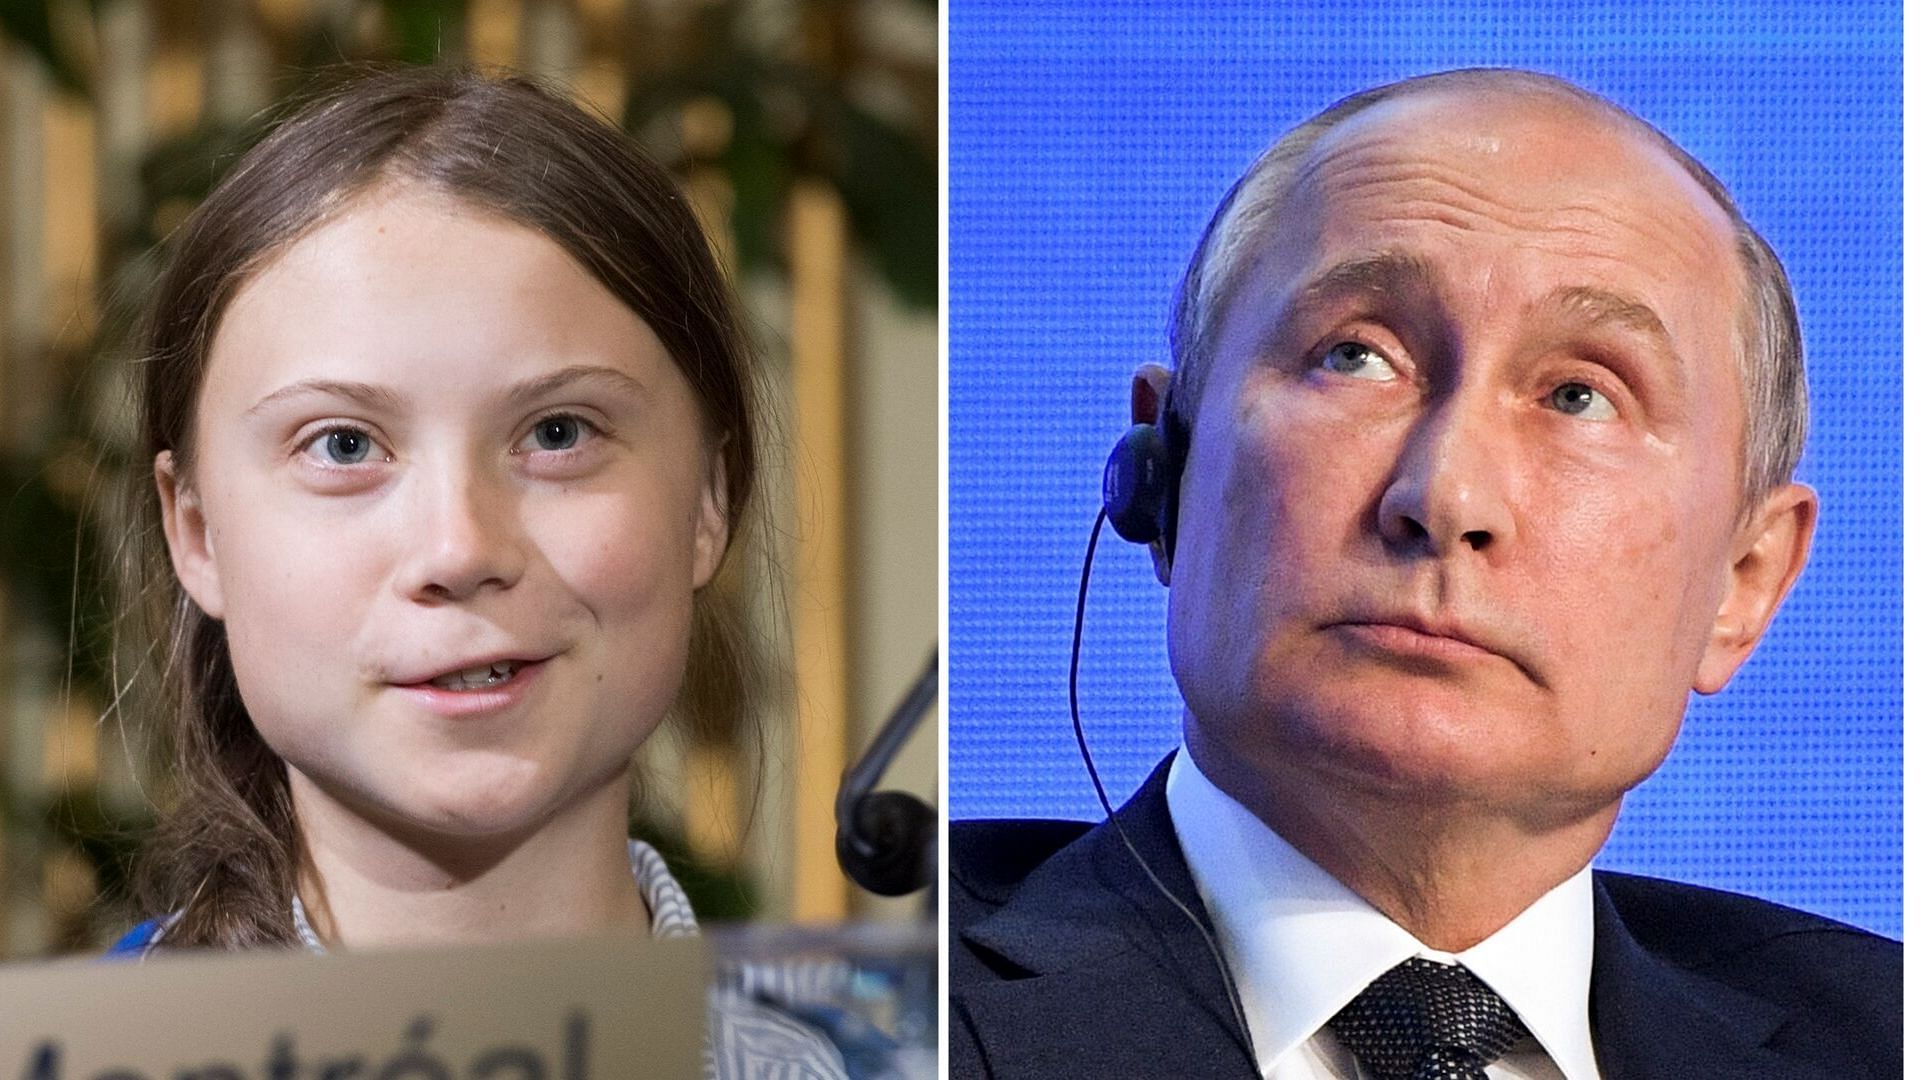 Putin has said he does not share excitement about teenage climate activist Greta Thunberg’s speech at the United Nations.